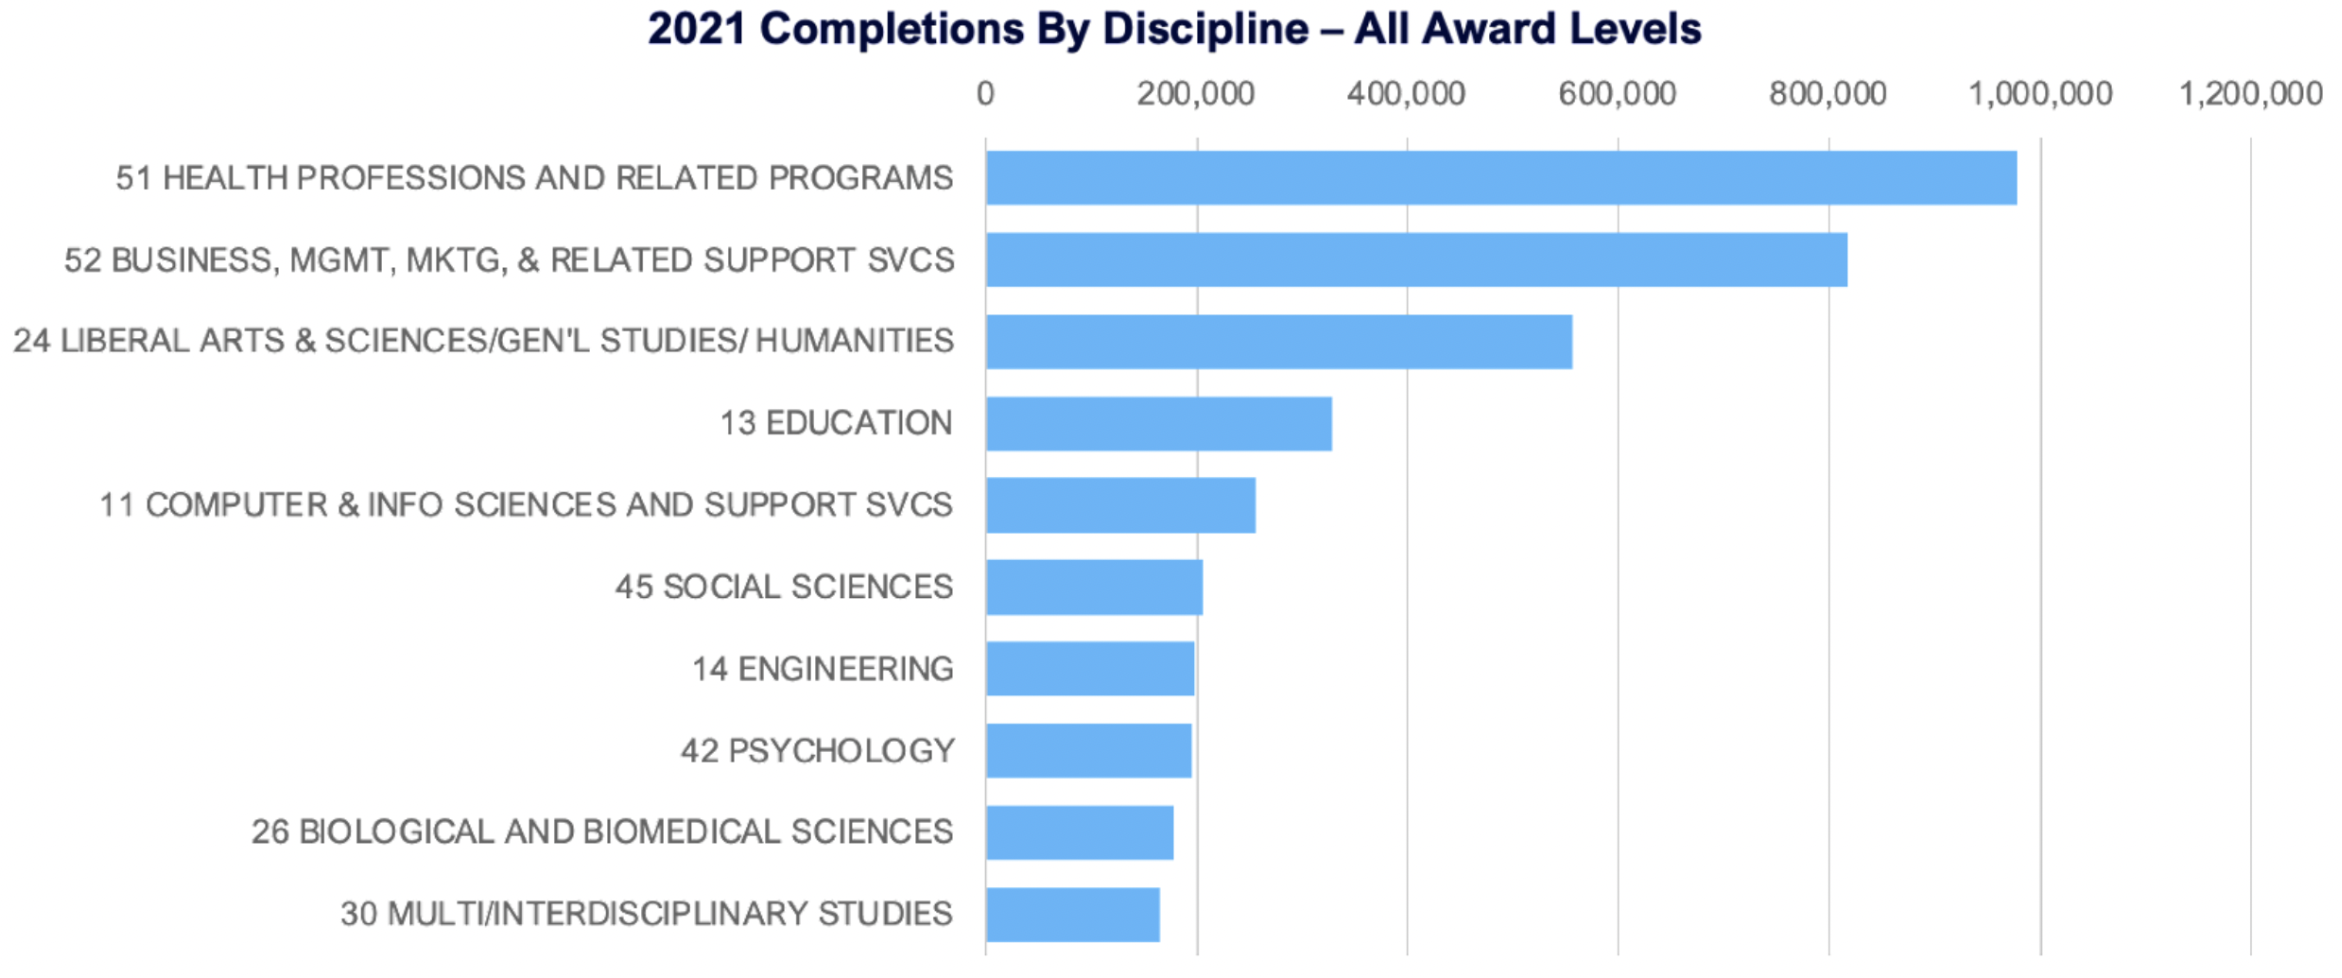 2021 completions by discipline - all award levels